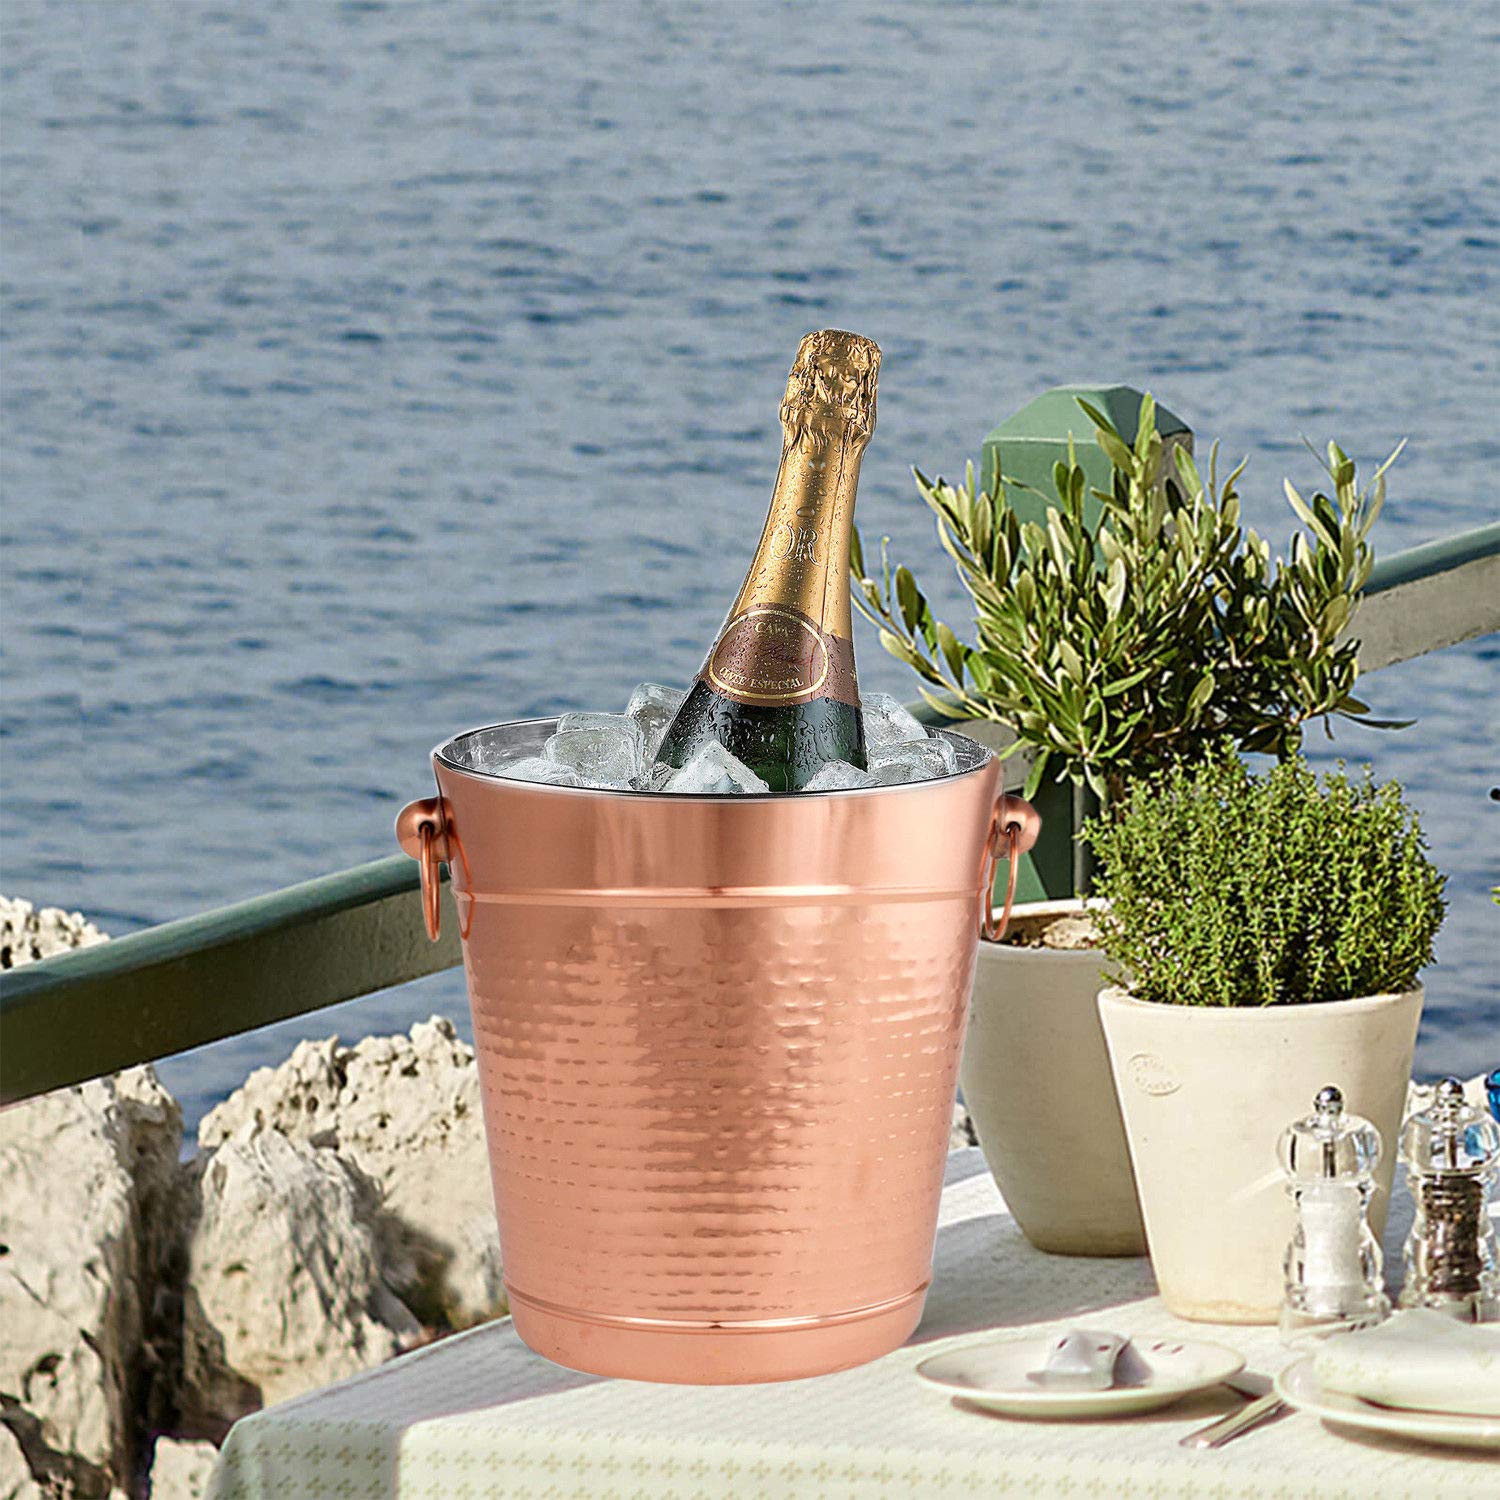 Copper Stainless Steel Champagne Bucket - Hammered Wine Bottle Cooler Ice Bucket